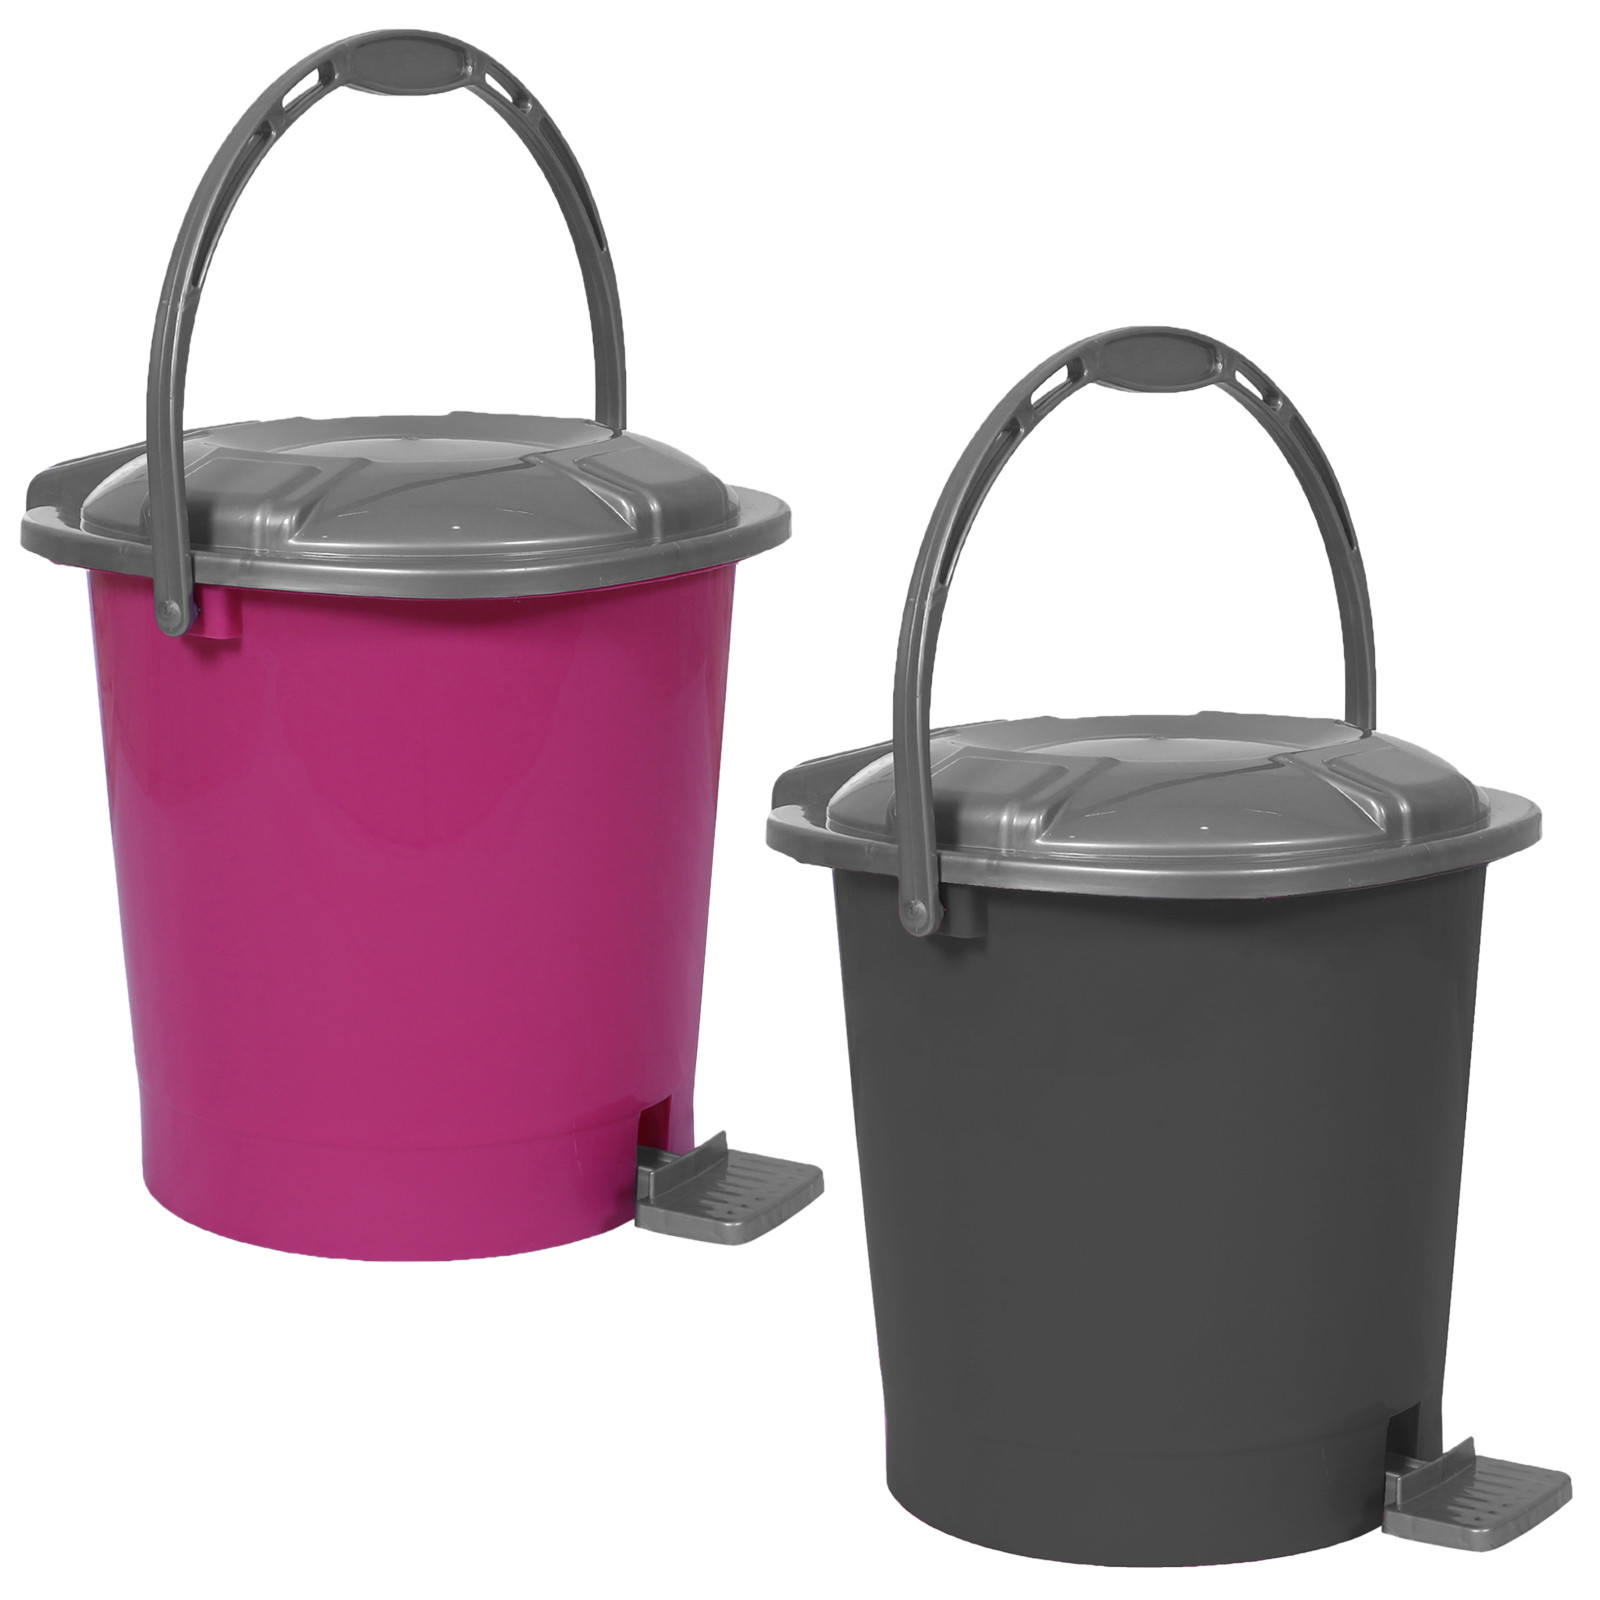 Kuber Industries Durable Plastic Pedal Dustbin|Waste Bin|Trash Can For Kitchen & Home With Handle,10 Litre,Pack of 2 (Pink & Gray)